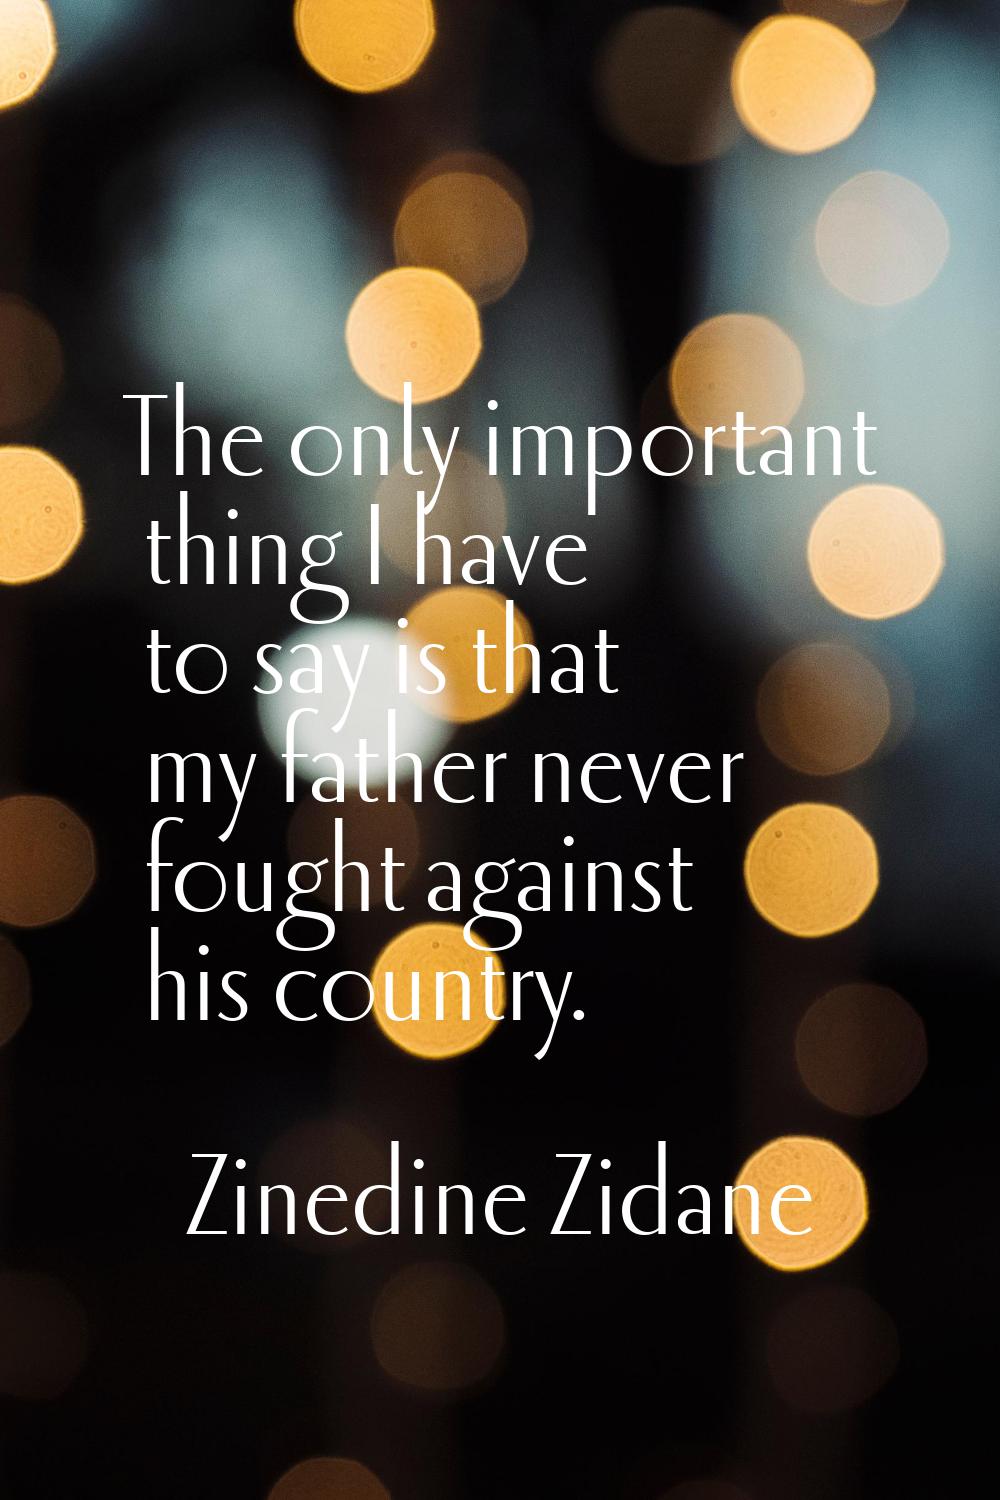 The only important thing I have to say is that my father never fought against his country.